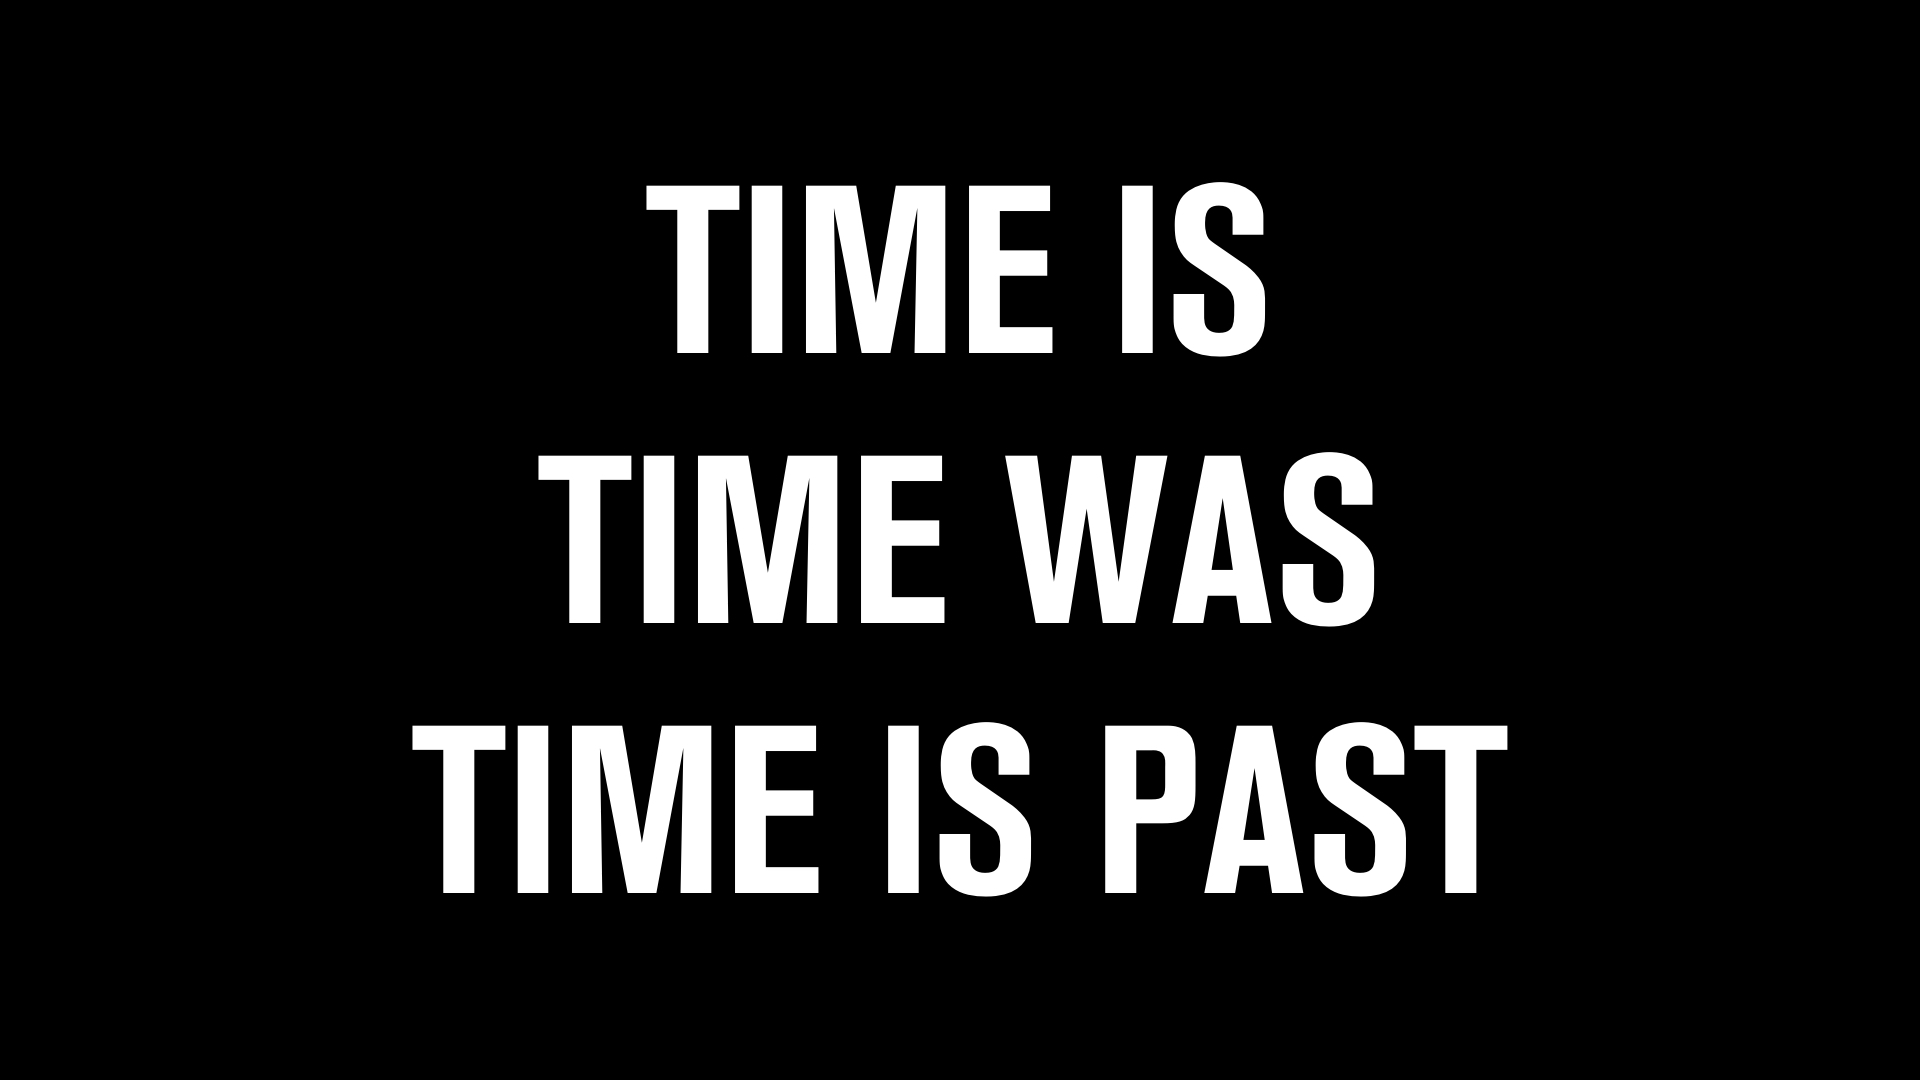 Time is, time was, time is past